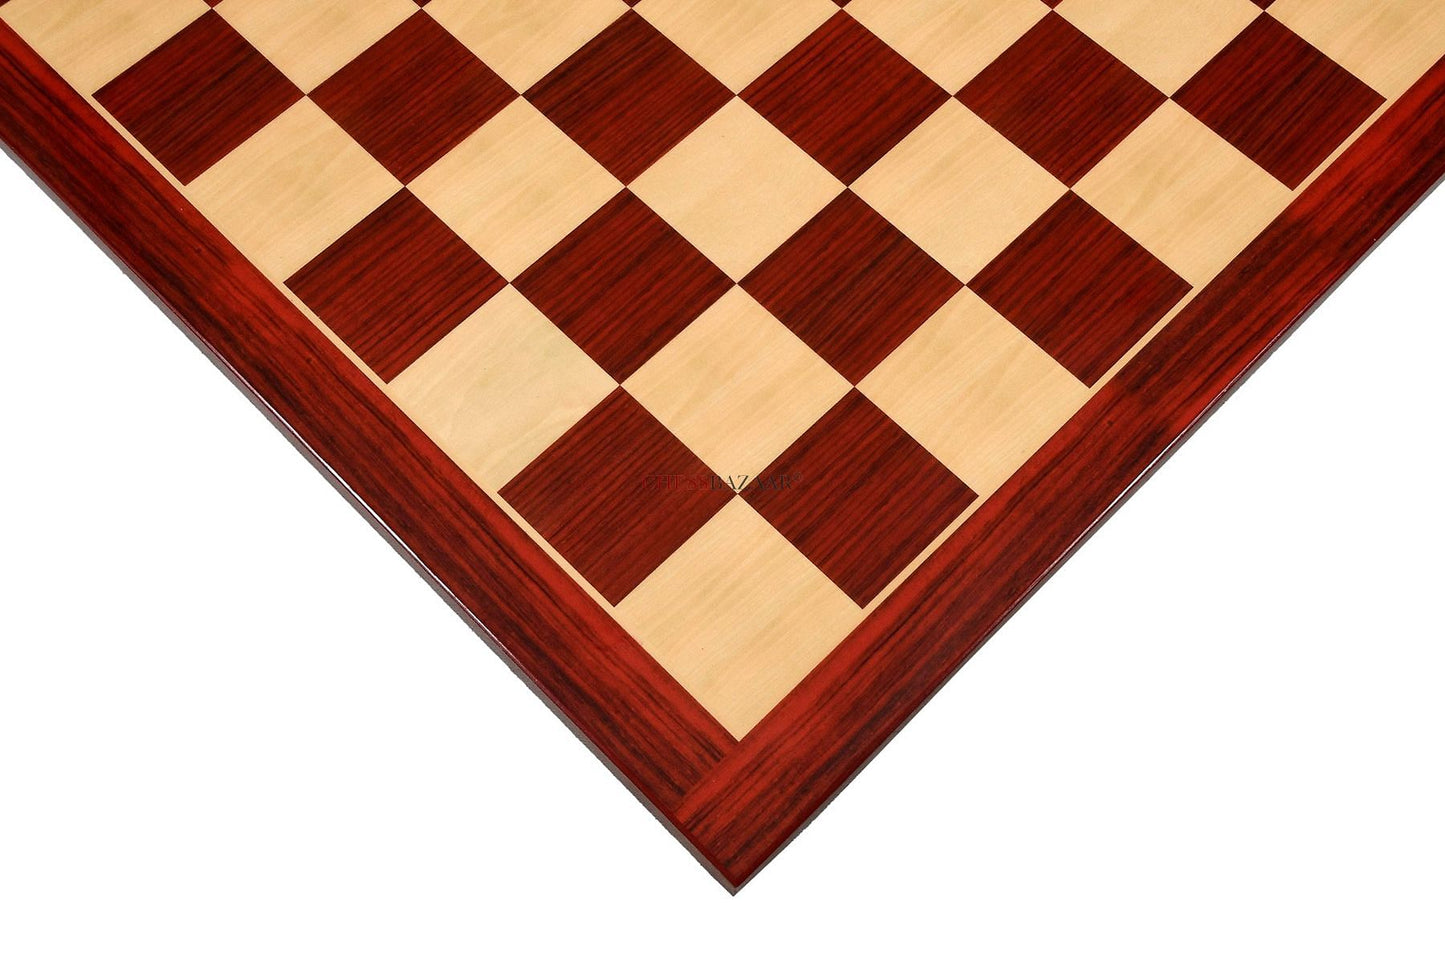 Wooden Printed Chess Board in Bud Rosewood & Boxwood Look 21" - 55 mm